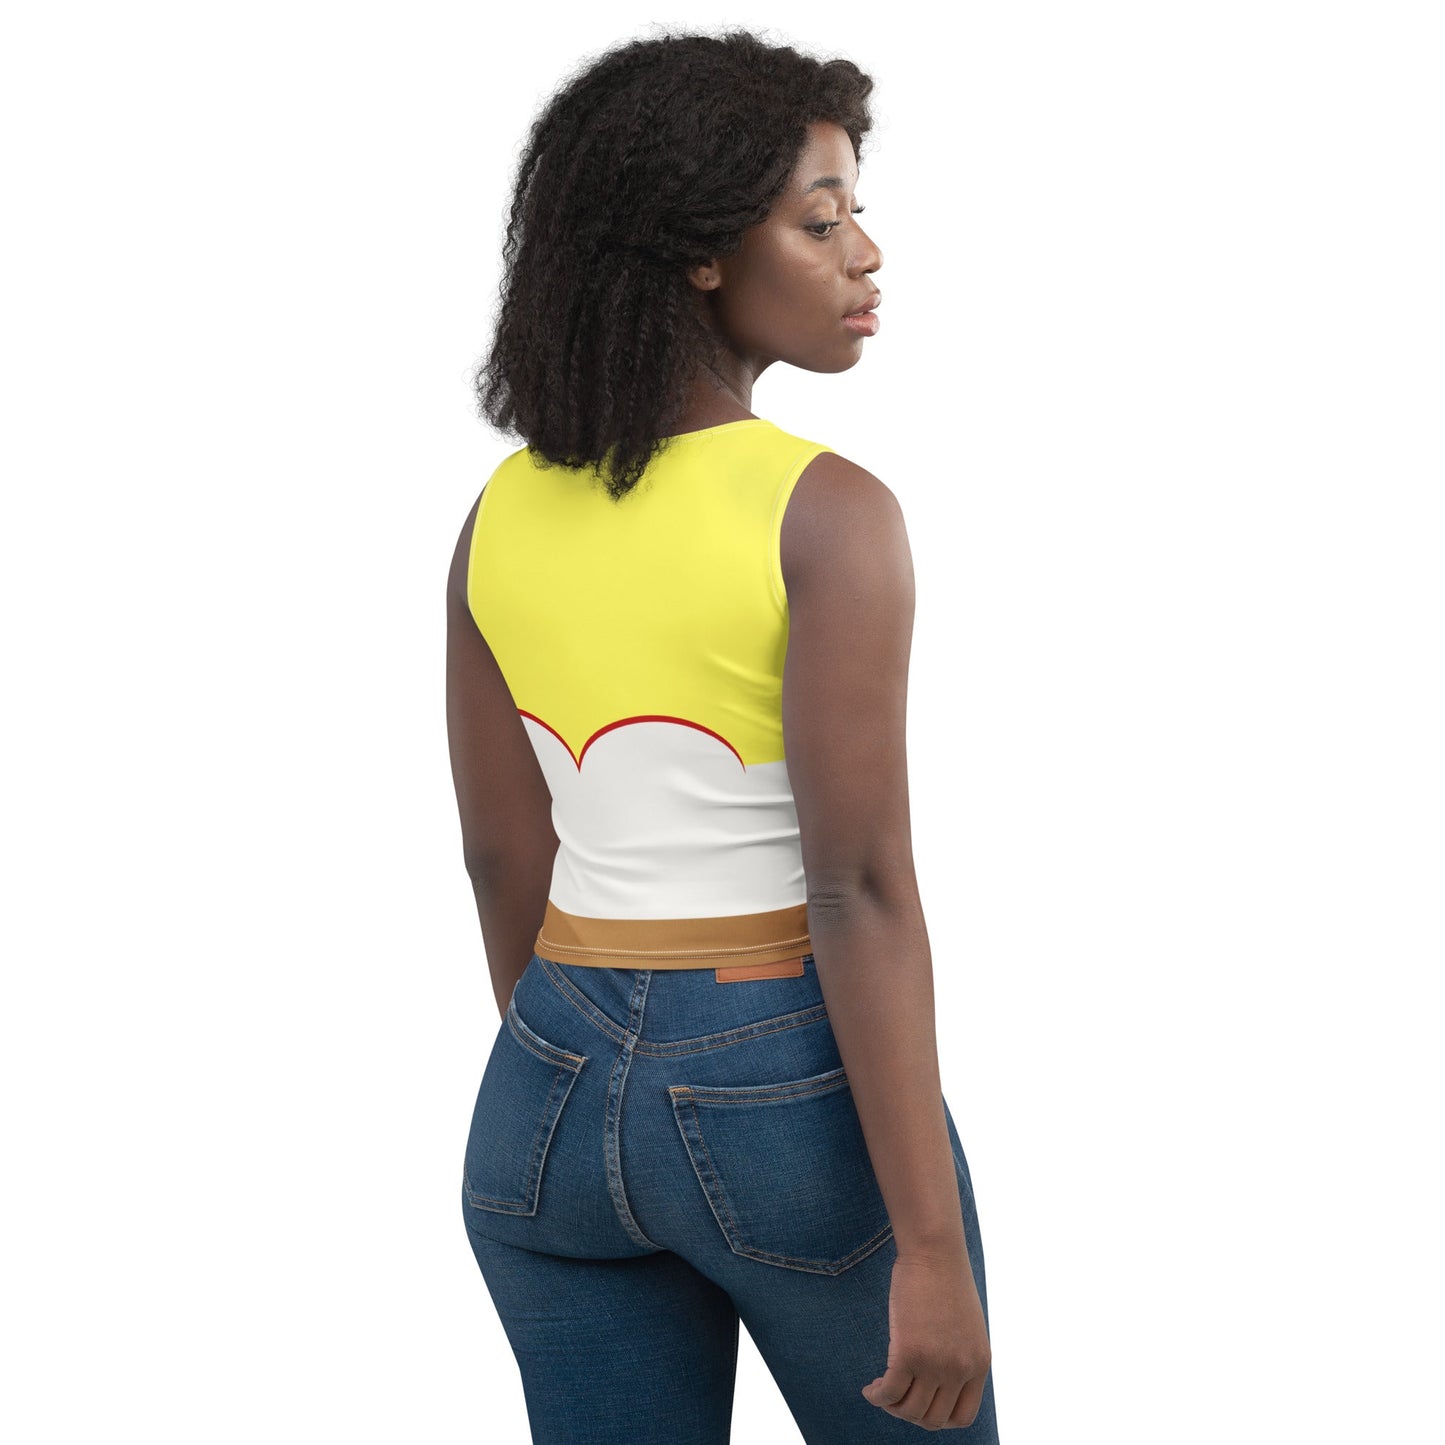 The Jessie Crop Top adult disney costumeAOP ClothingAdult T-ShirtWrong Lever Clothing